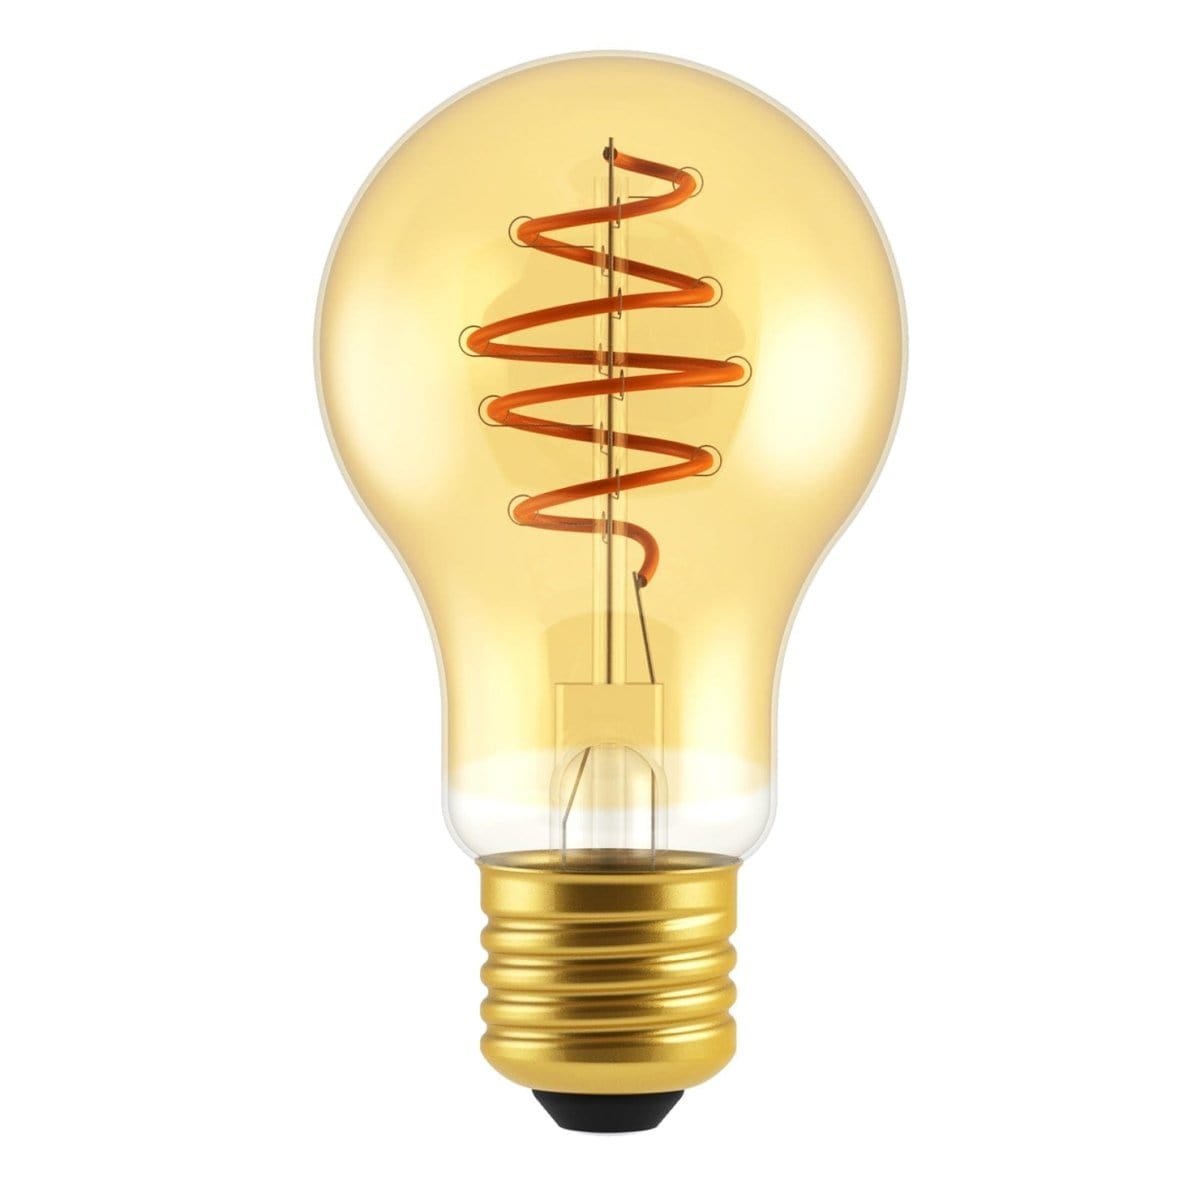 Heavenly Chandeliers Light Bulbs E27 G45 Decorative bulb with a golden glow